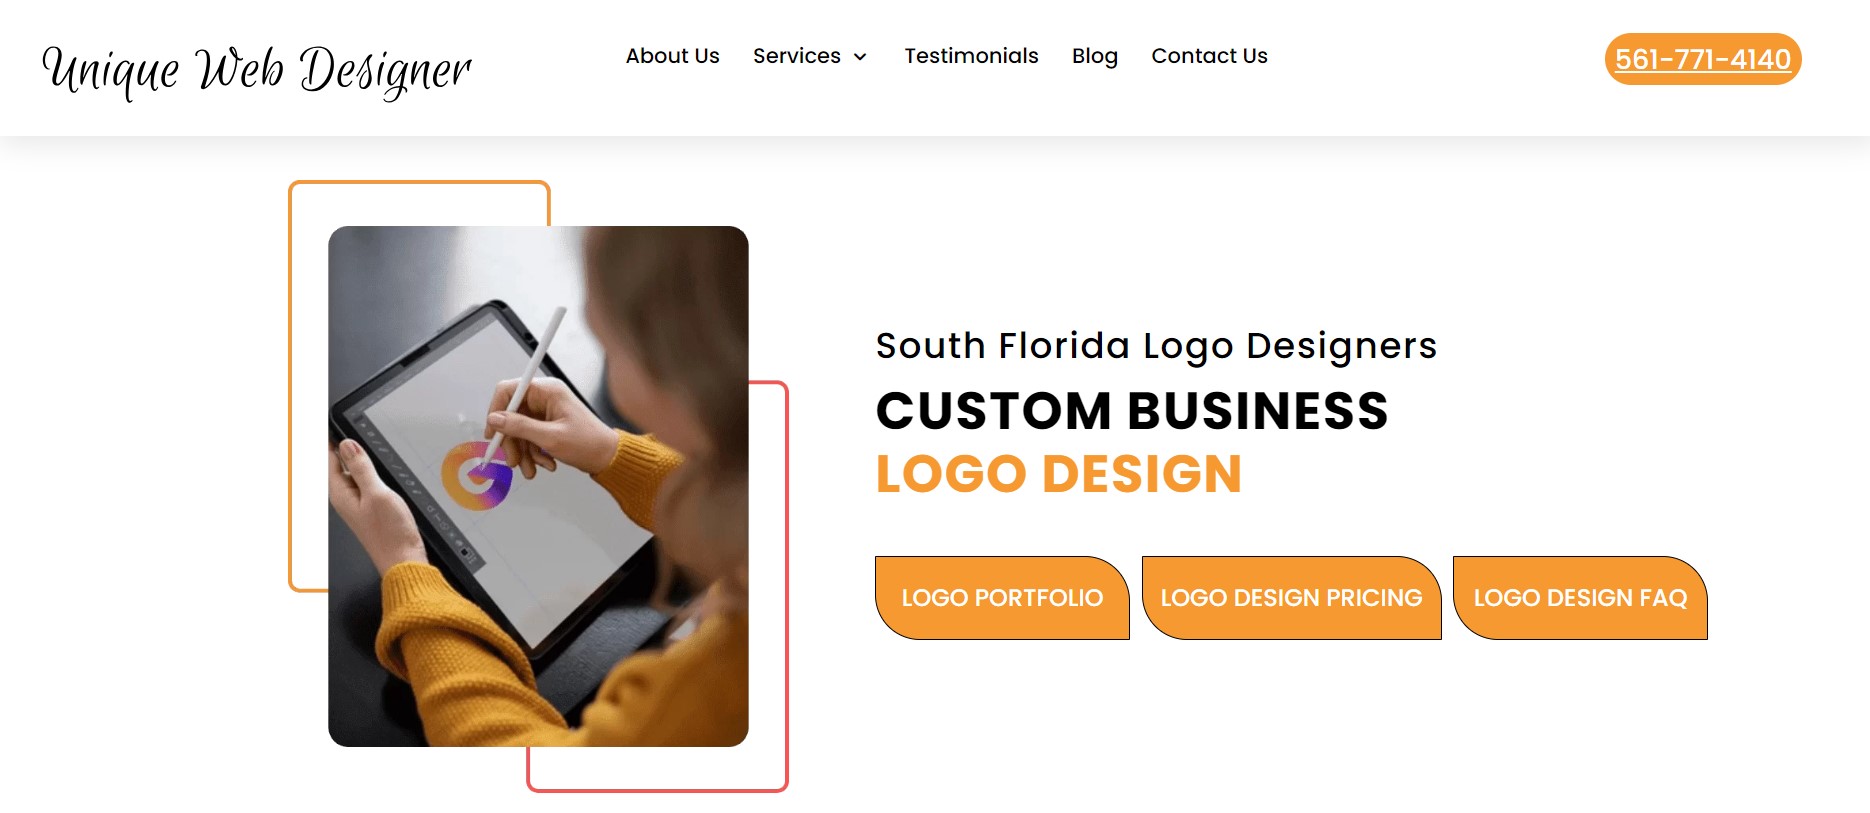 Service page for logo design